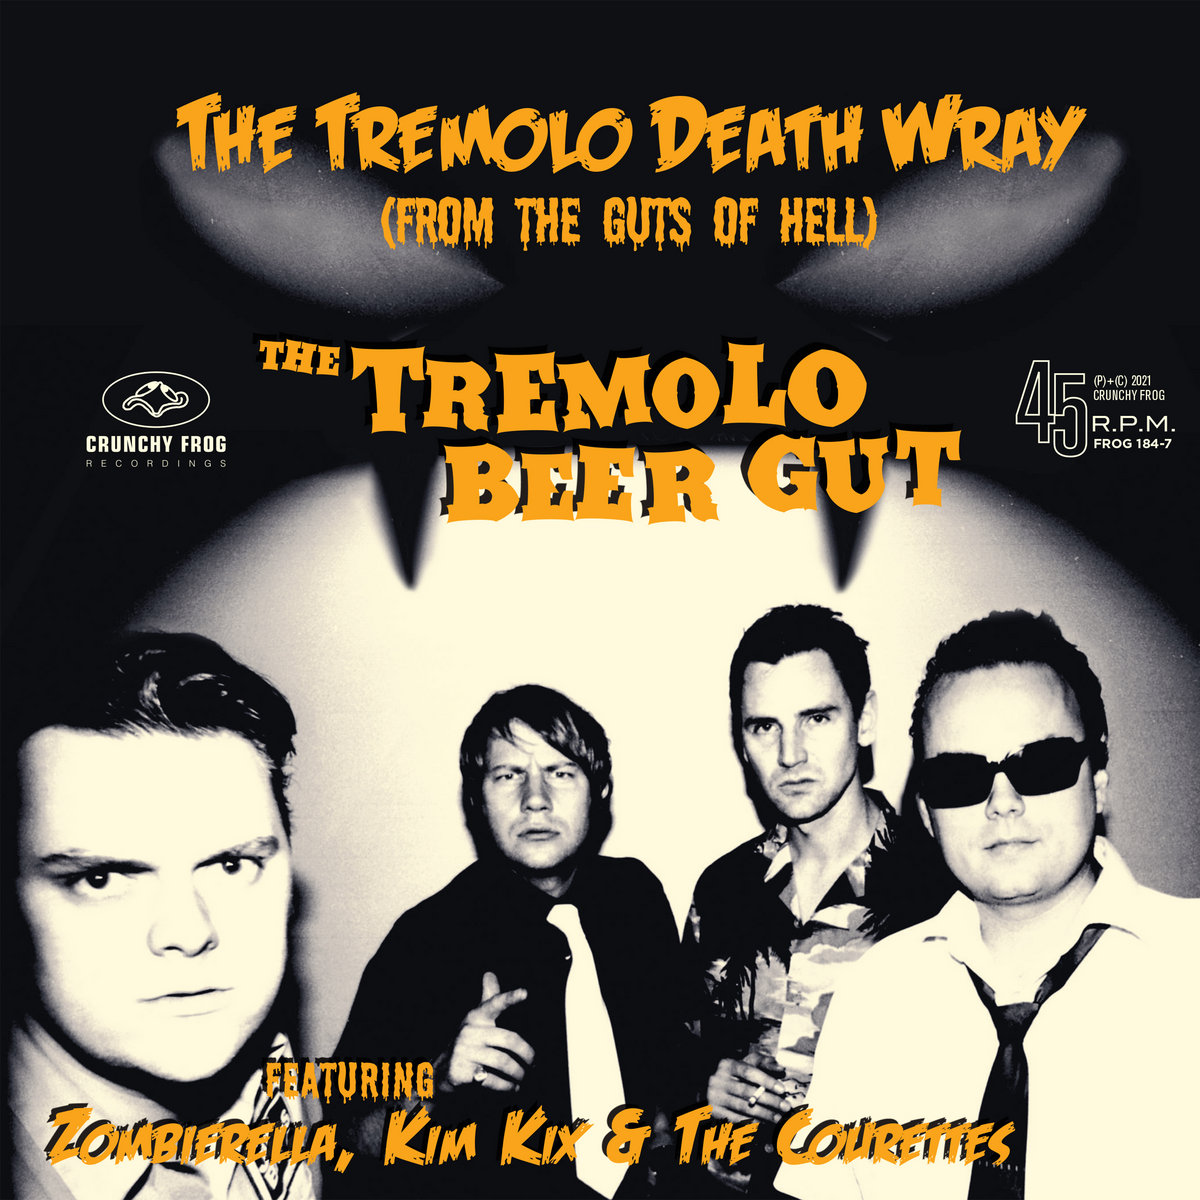 Tremolo Beer Gut, The - X-mas Date at The Snow Club/The Tremolo Death Wray (From